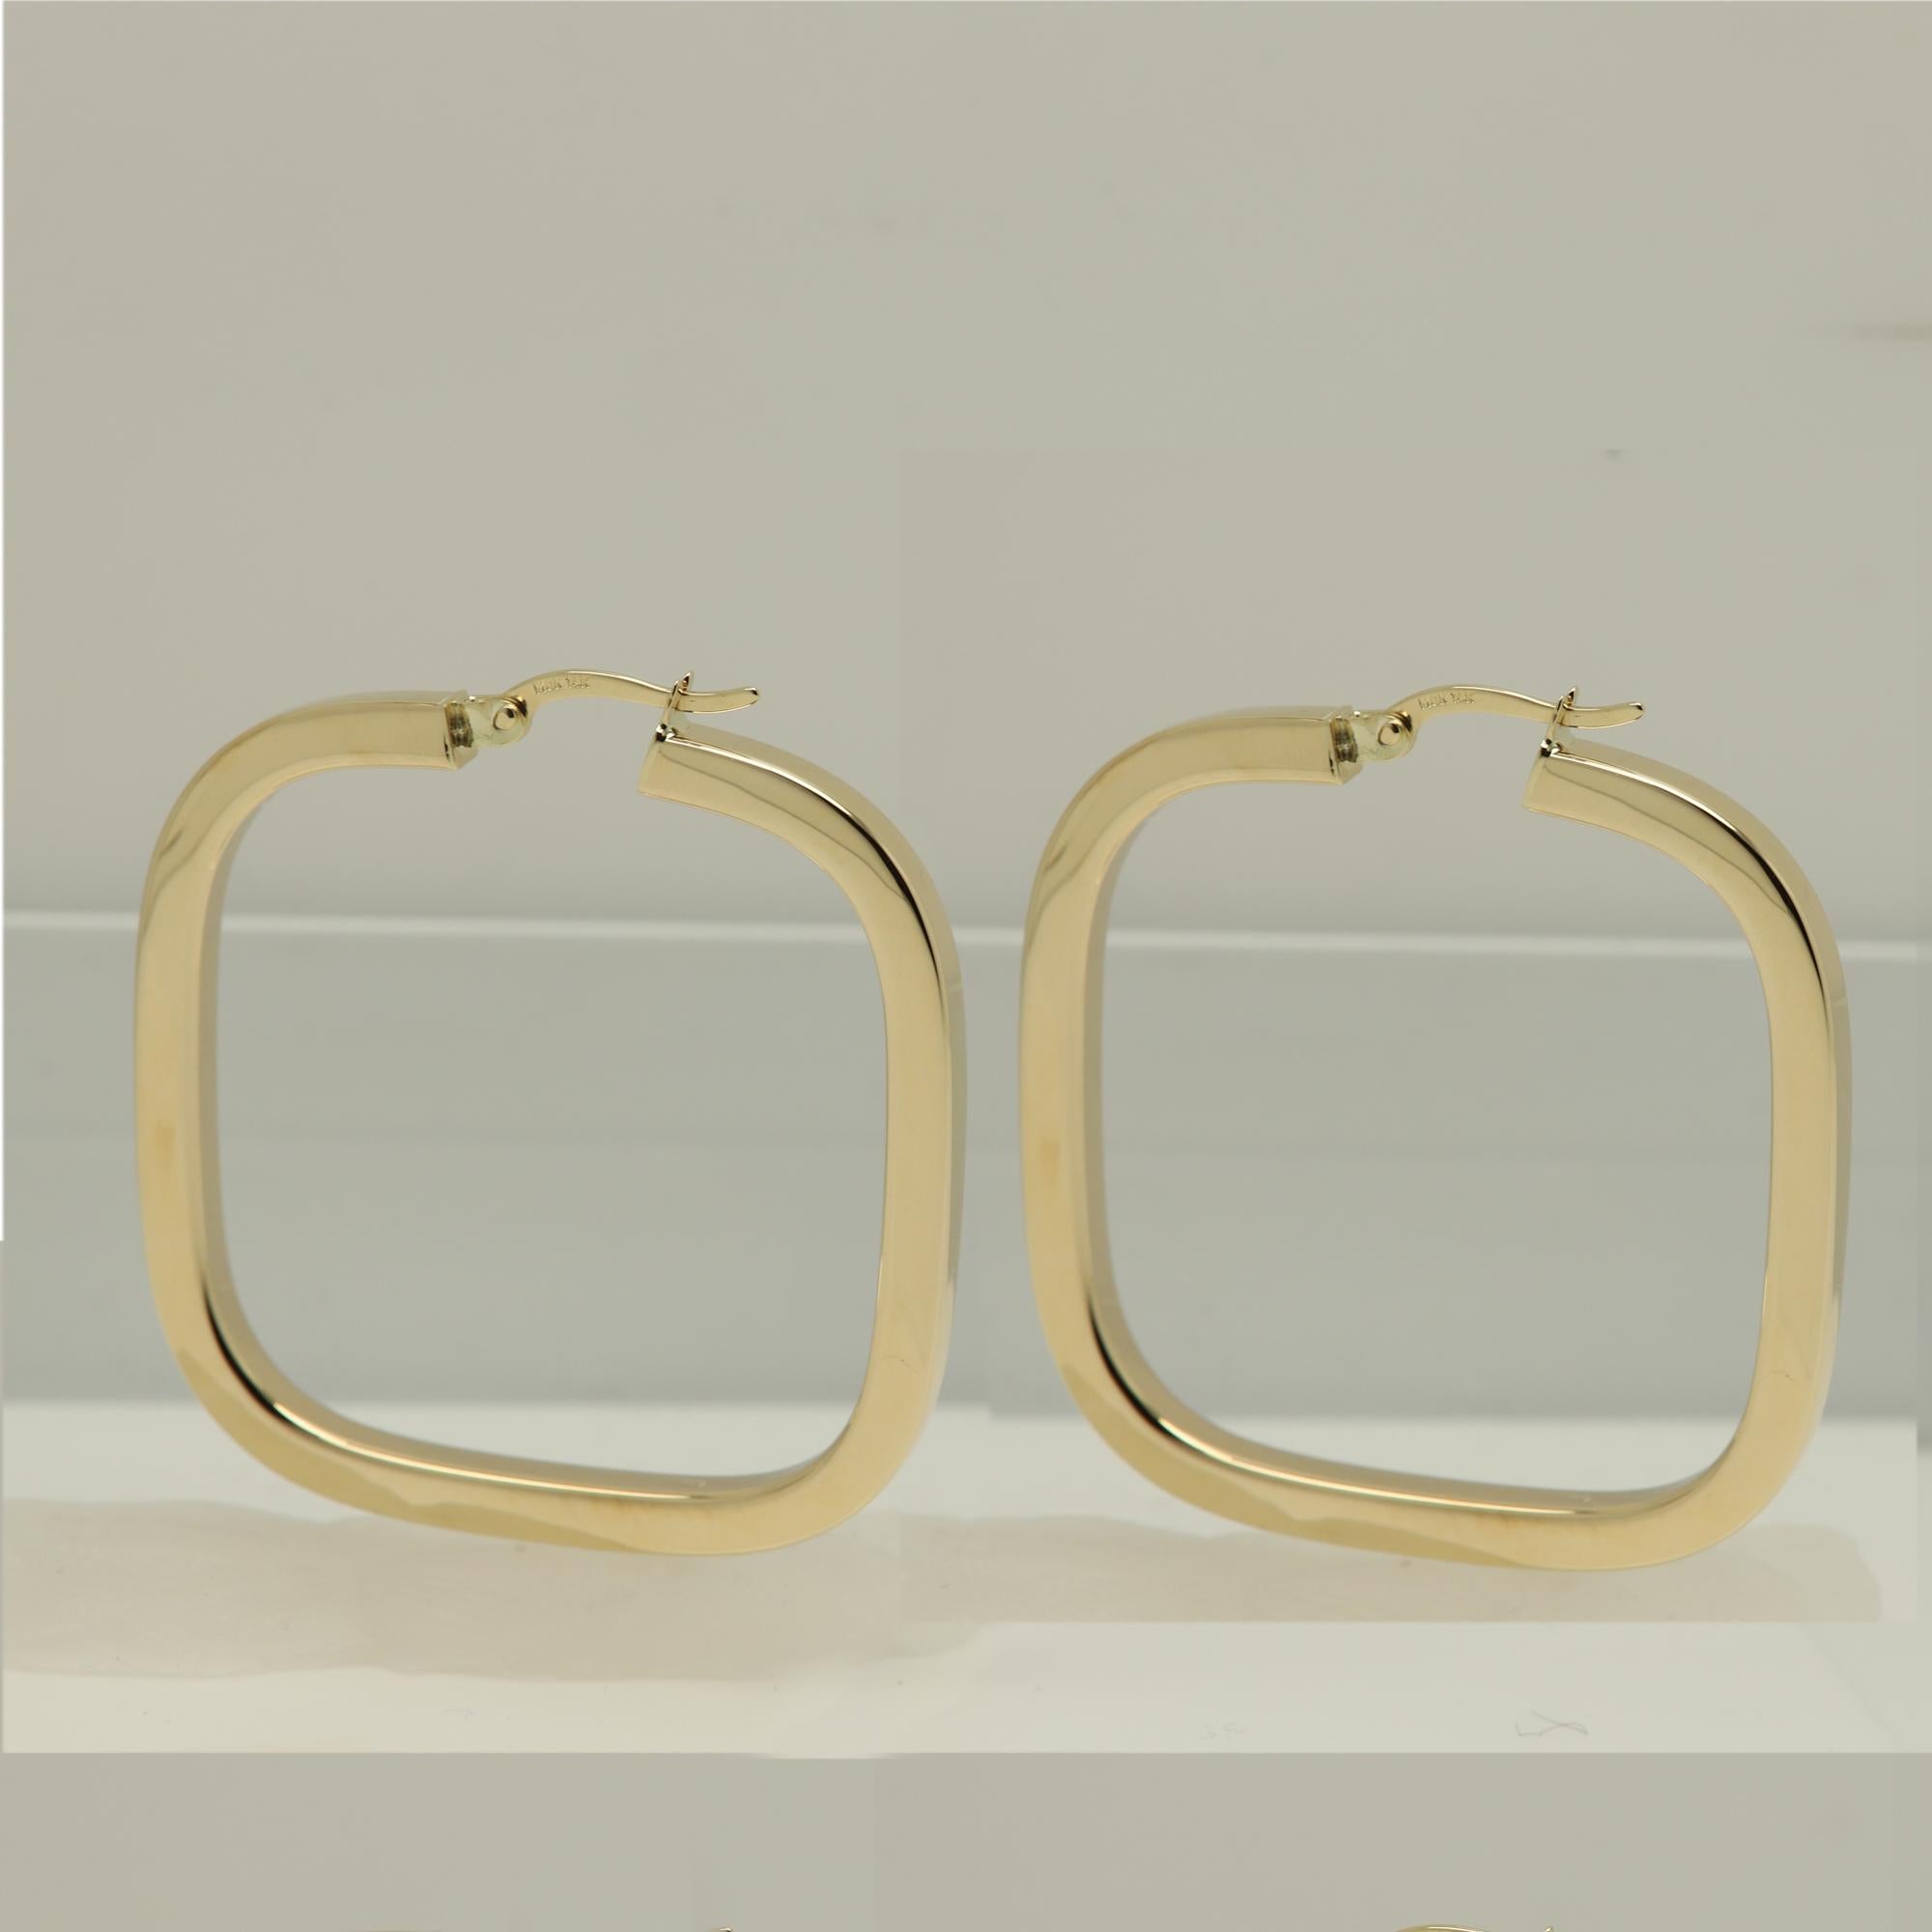 Square Italian Hoops 14 Karat Solid Gold Earrings Gold Hoops Artistic Earrings In New Condition For Sale In Brooklyn, NY